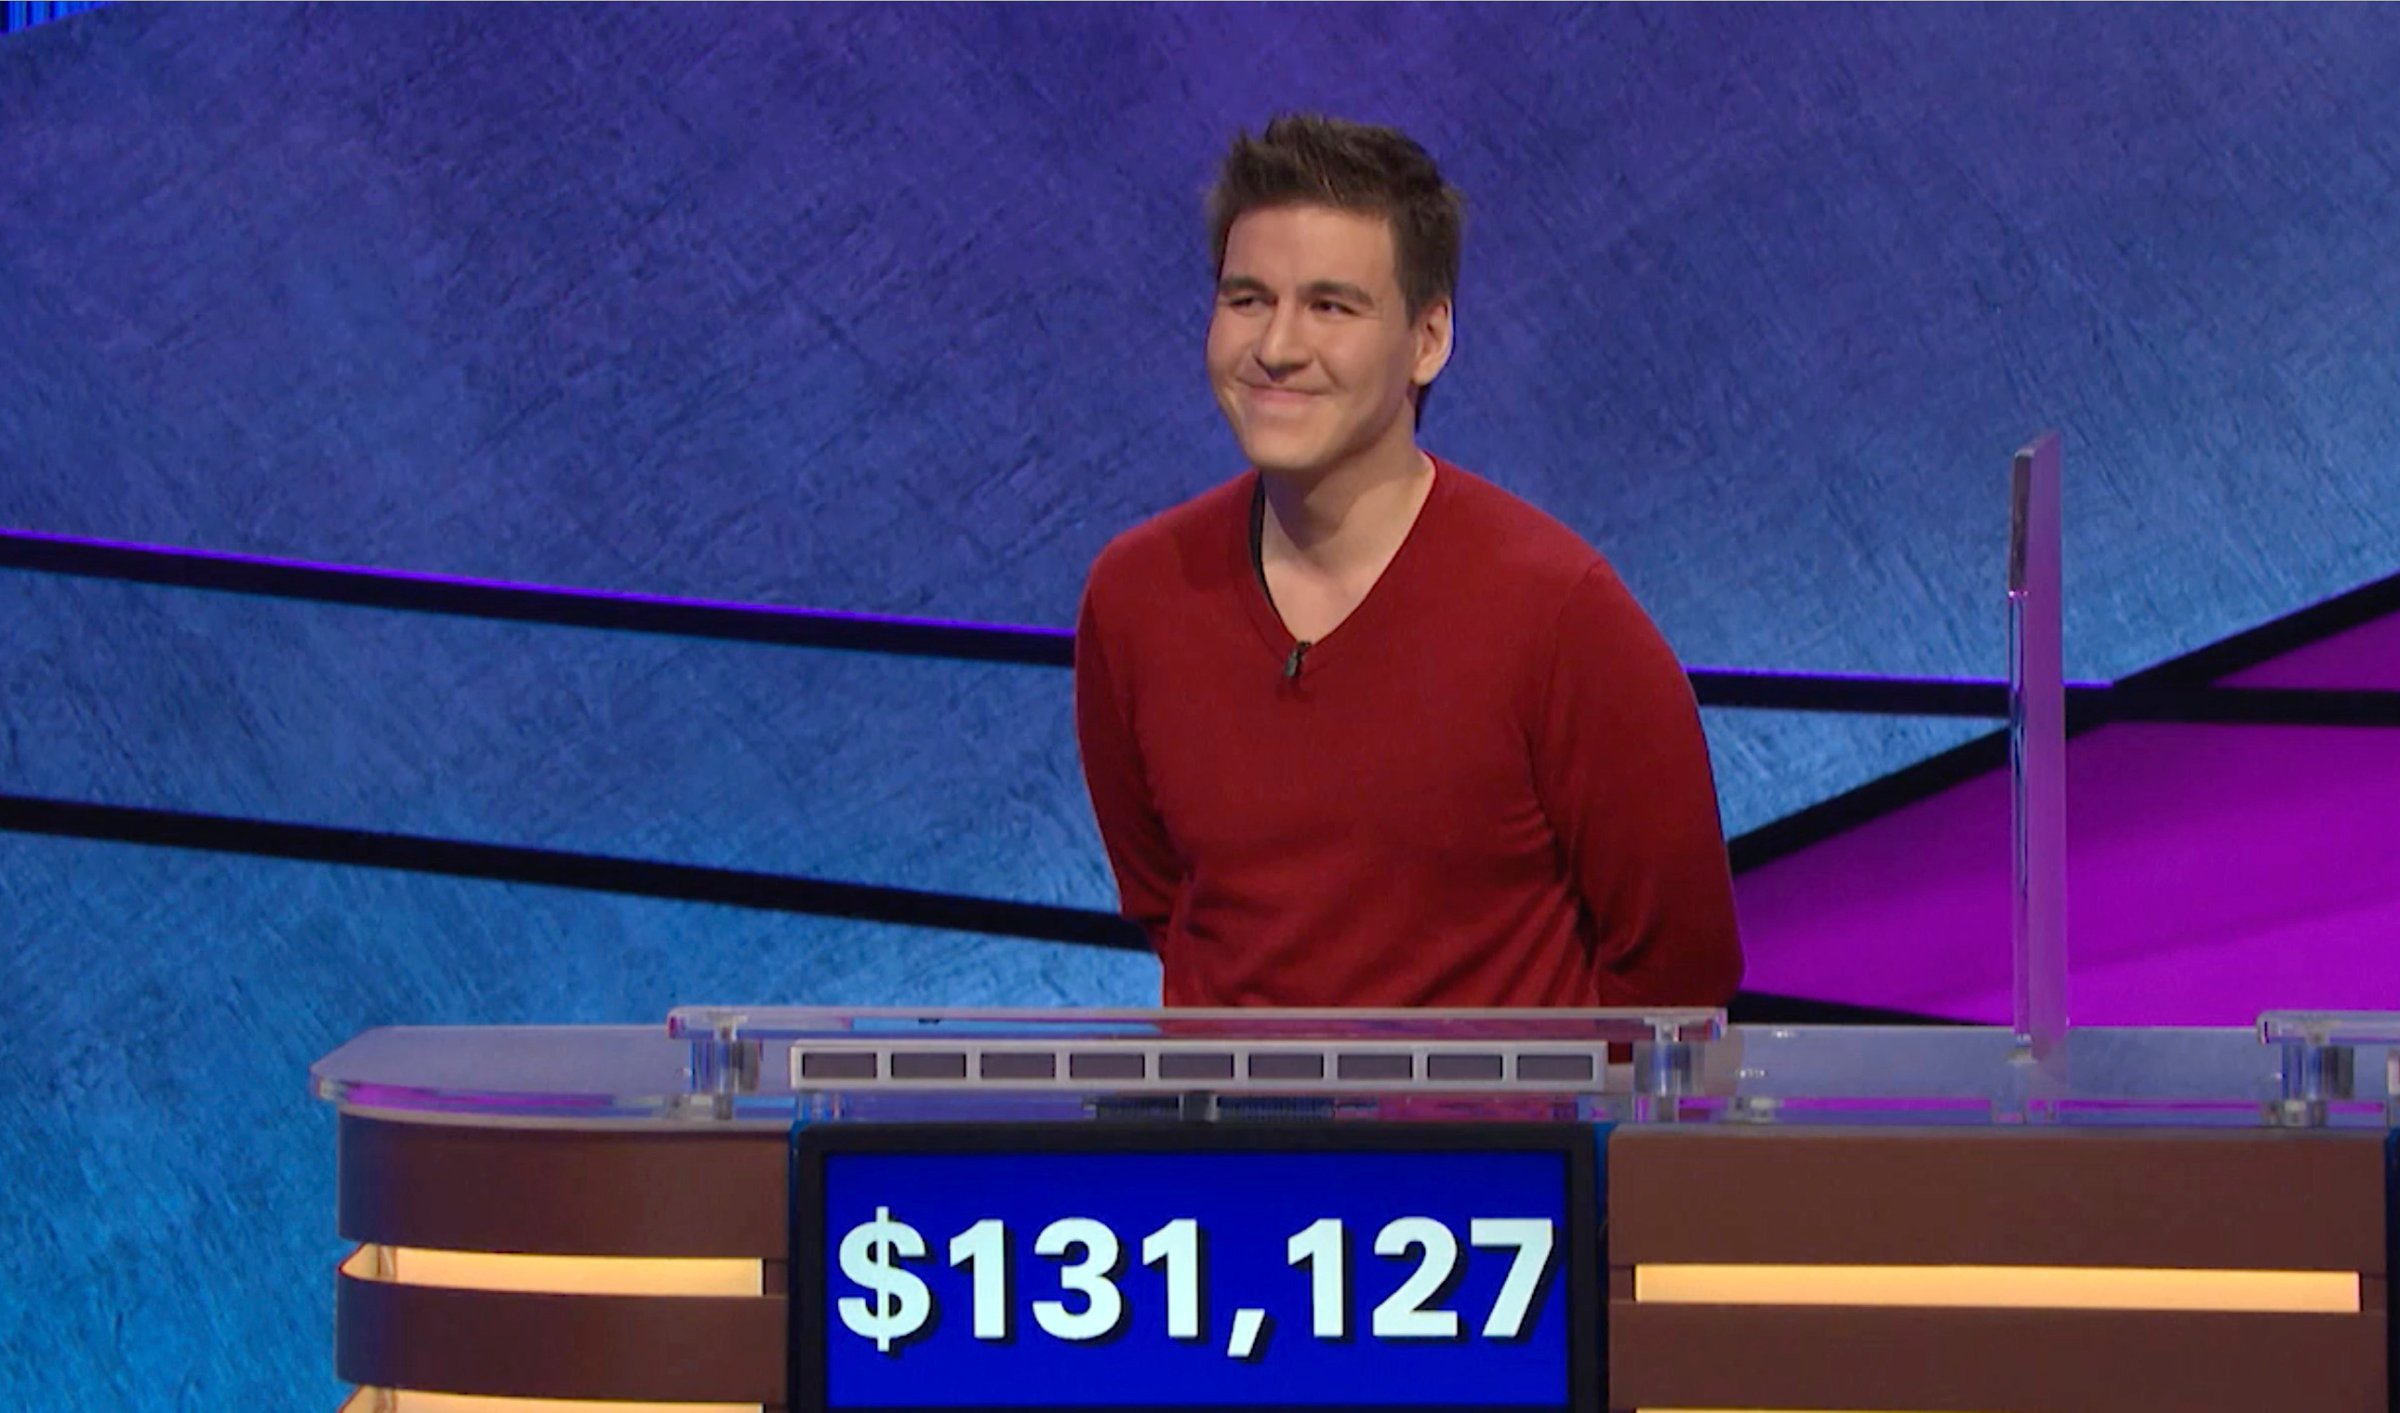 Las Vegas gambler James Holzhauer has passed the $1 million mark in winnings on 'Jeopardy!' on his 14th appearance.